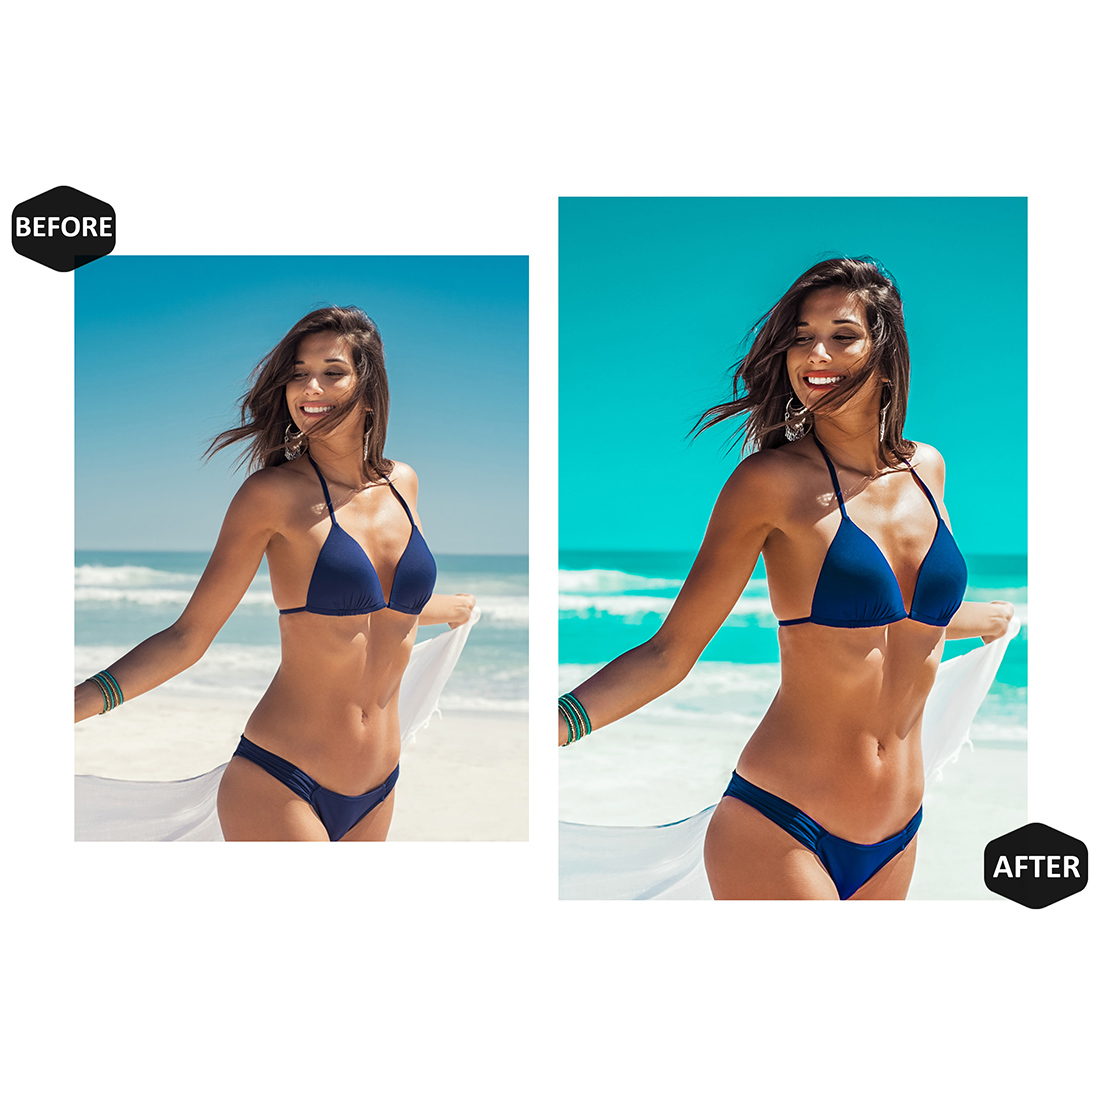 12 Photoshop Actions, Rich Pigment Ps Action, Vibrant ACR Preset, Summer Bright Ps Filter, Atn Portrait And Lifestyle Theme For Instagram, Blogger preview image.